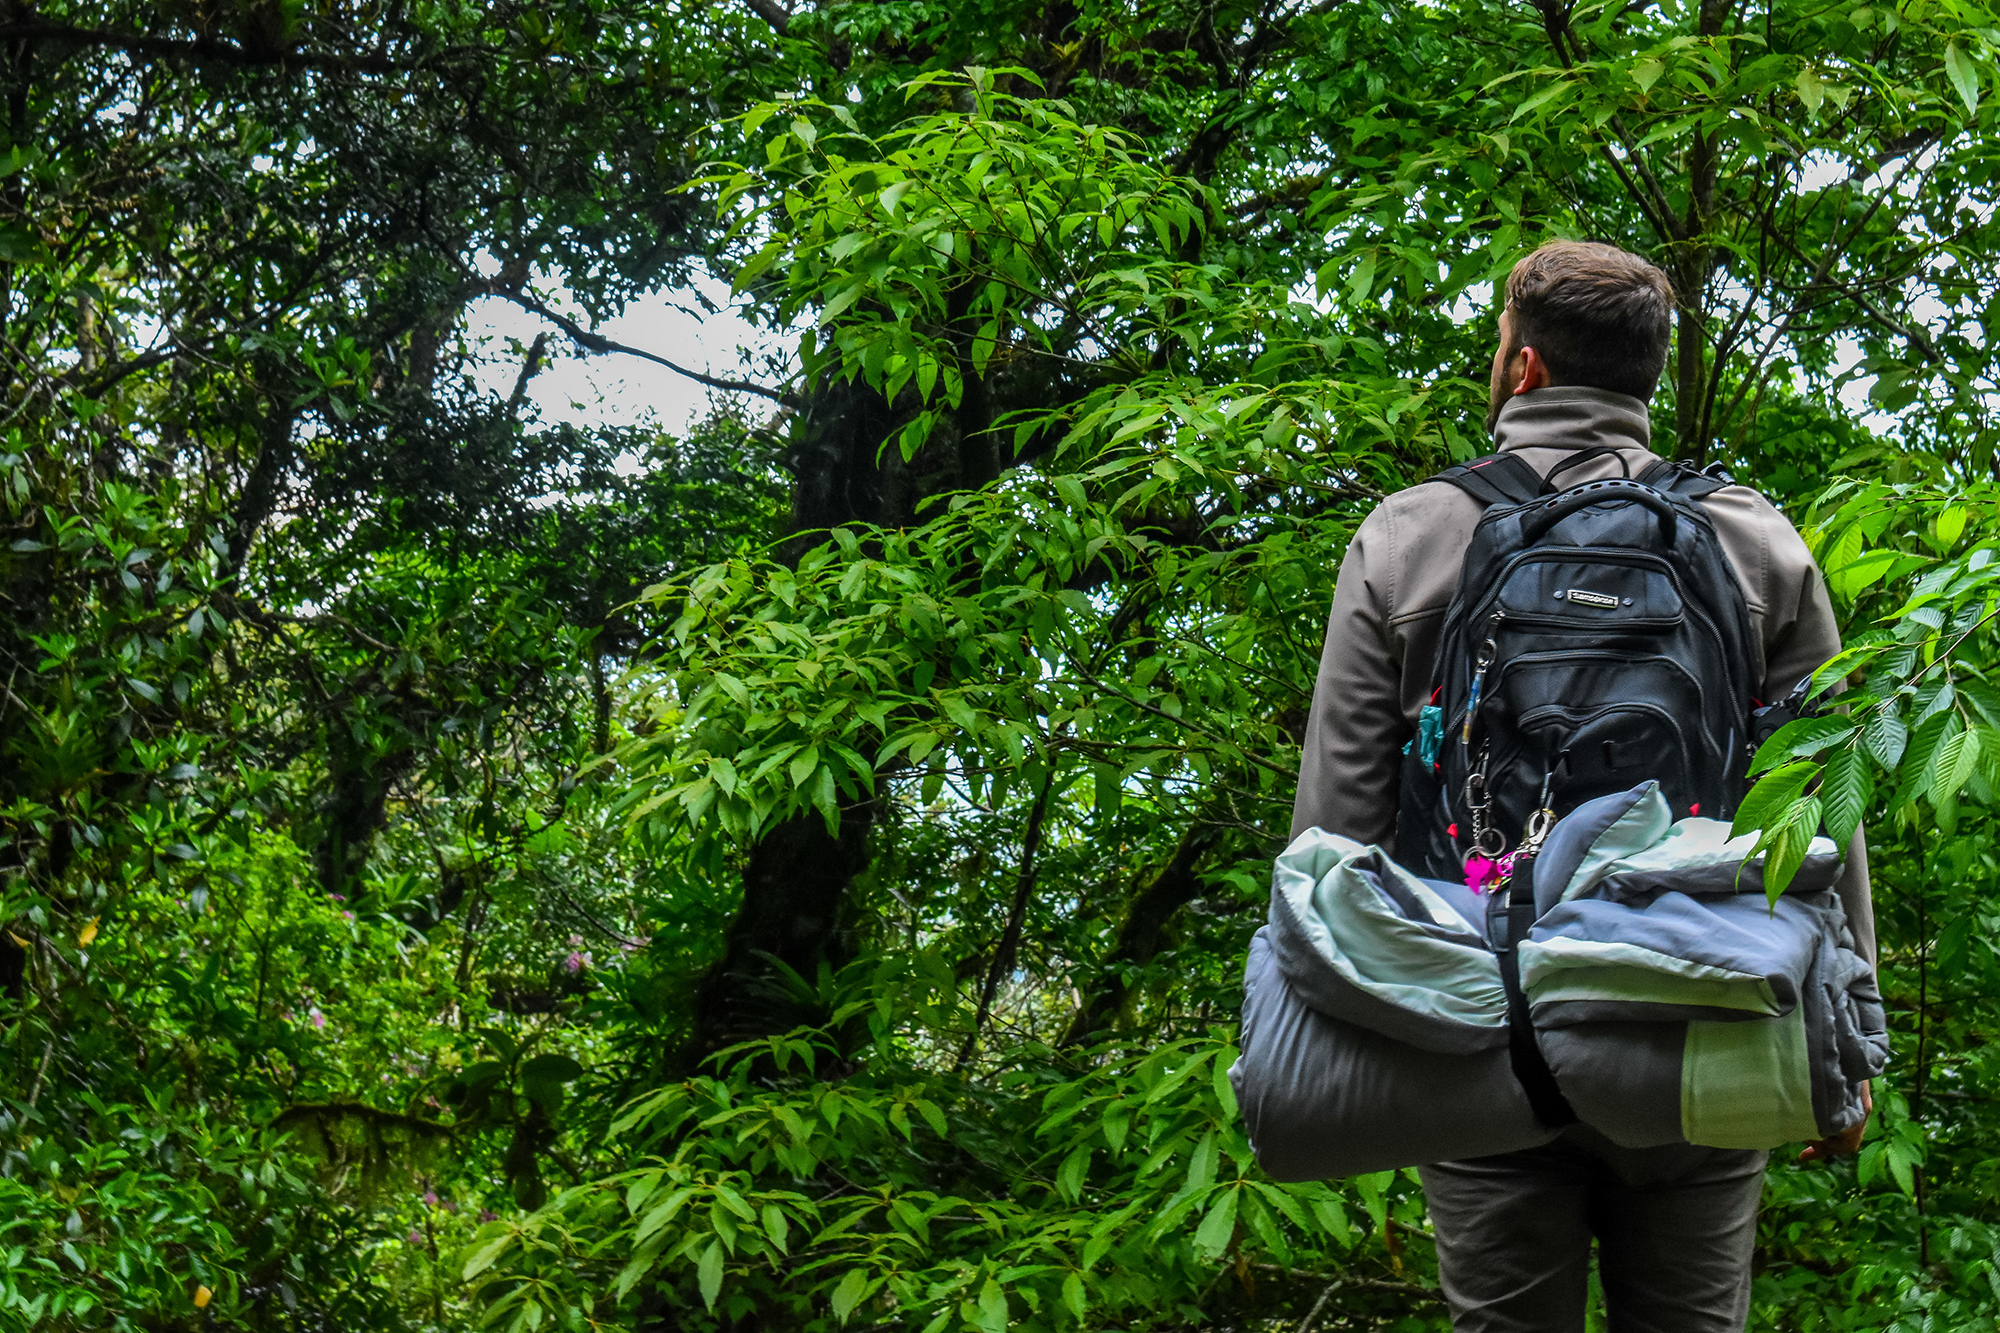 A view of a man with backpack. Photo: Juan Mandez via Pexels